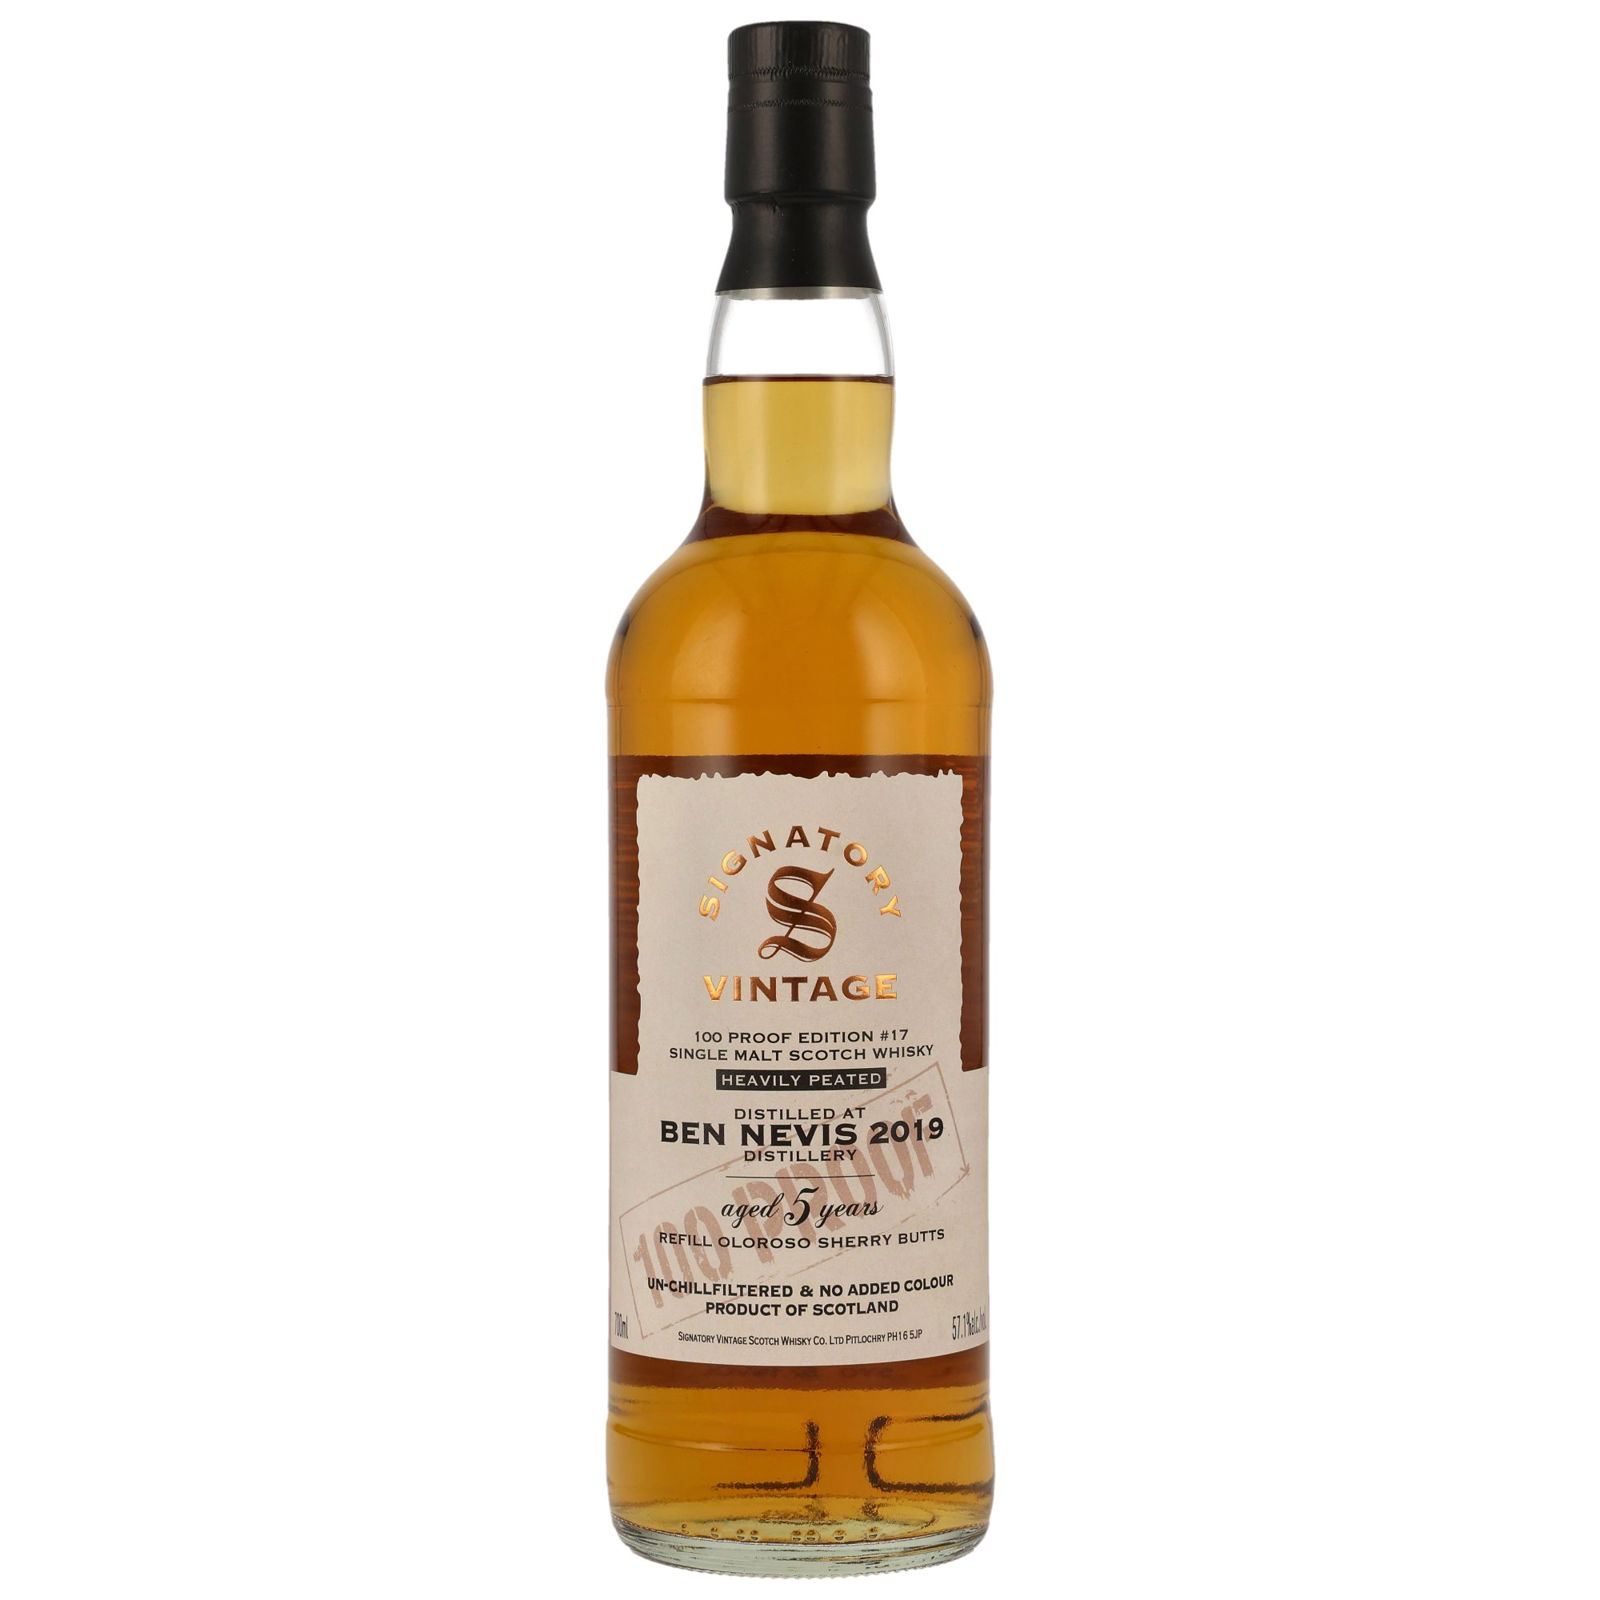 Ben Nevis Heavily Peated 2019/2024 - 5 Jahre Oloroso Sherry Butts 100 Proof Edition #17 (Signatory)